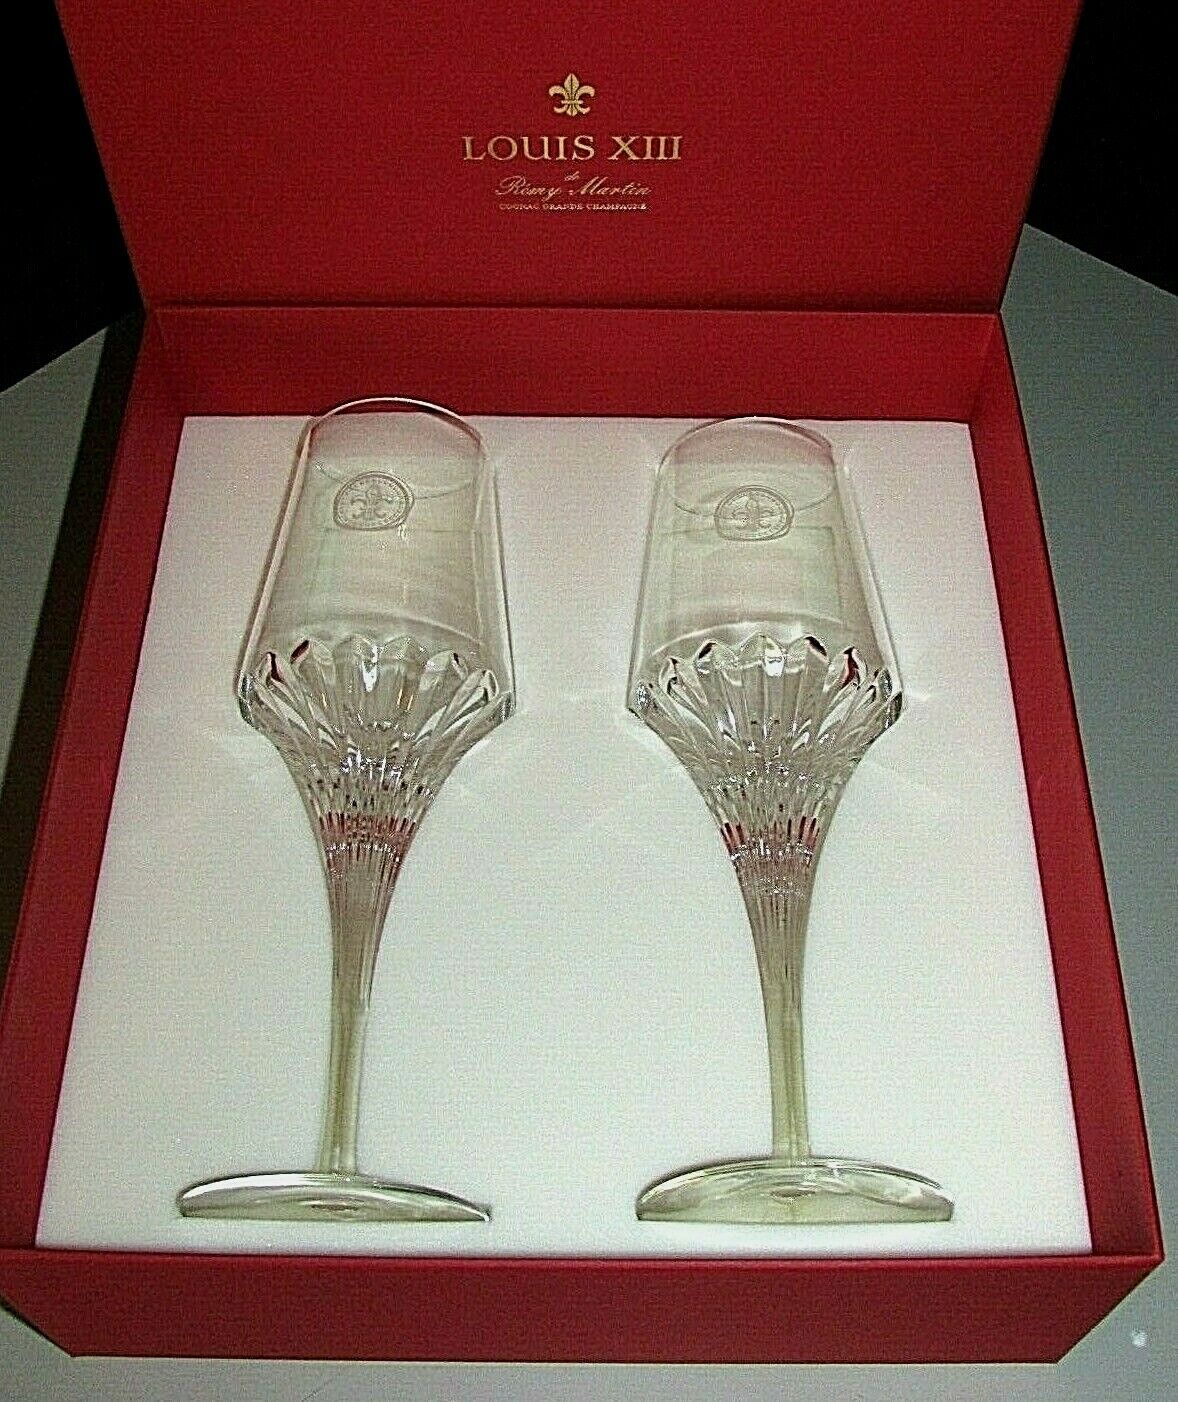 (2) New Remy Martin Louis xiii Crystal Glass Cristophe Pillet Gift Box XIII 2cl